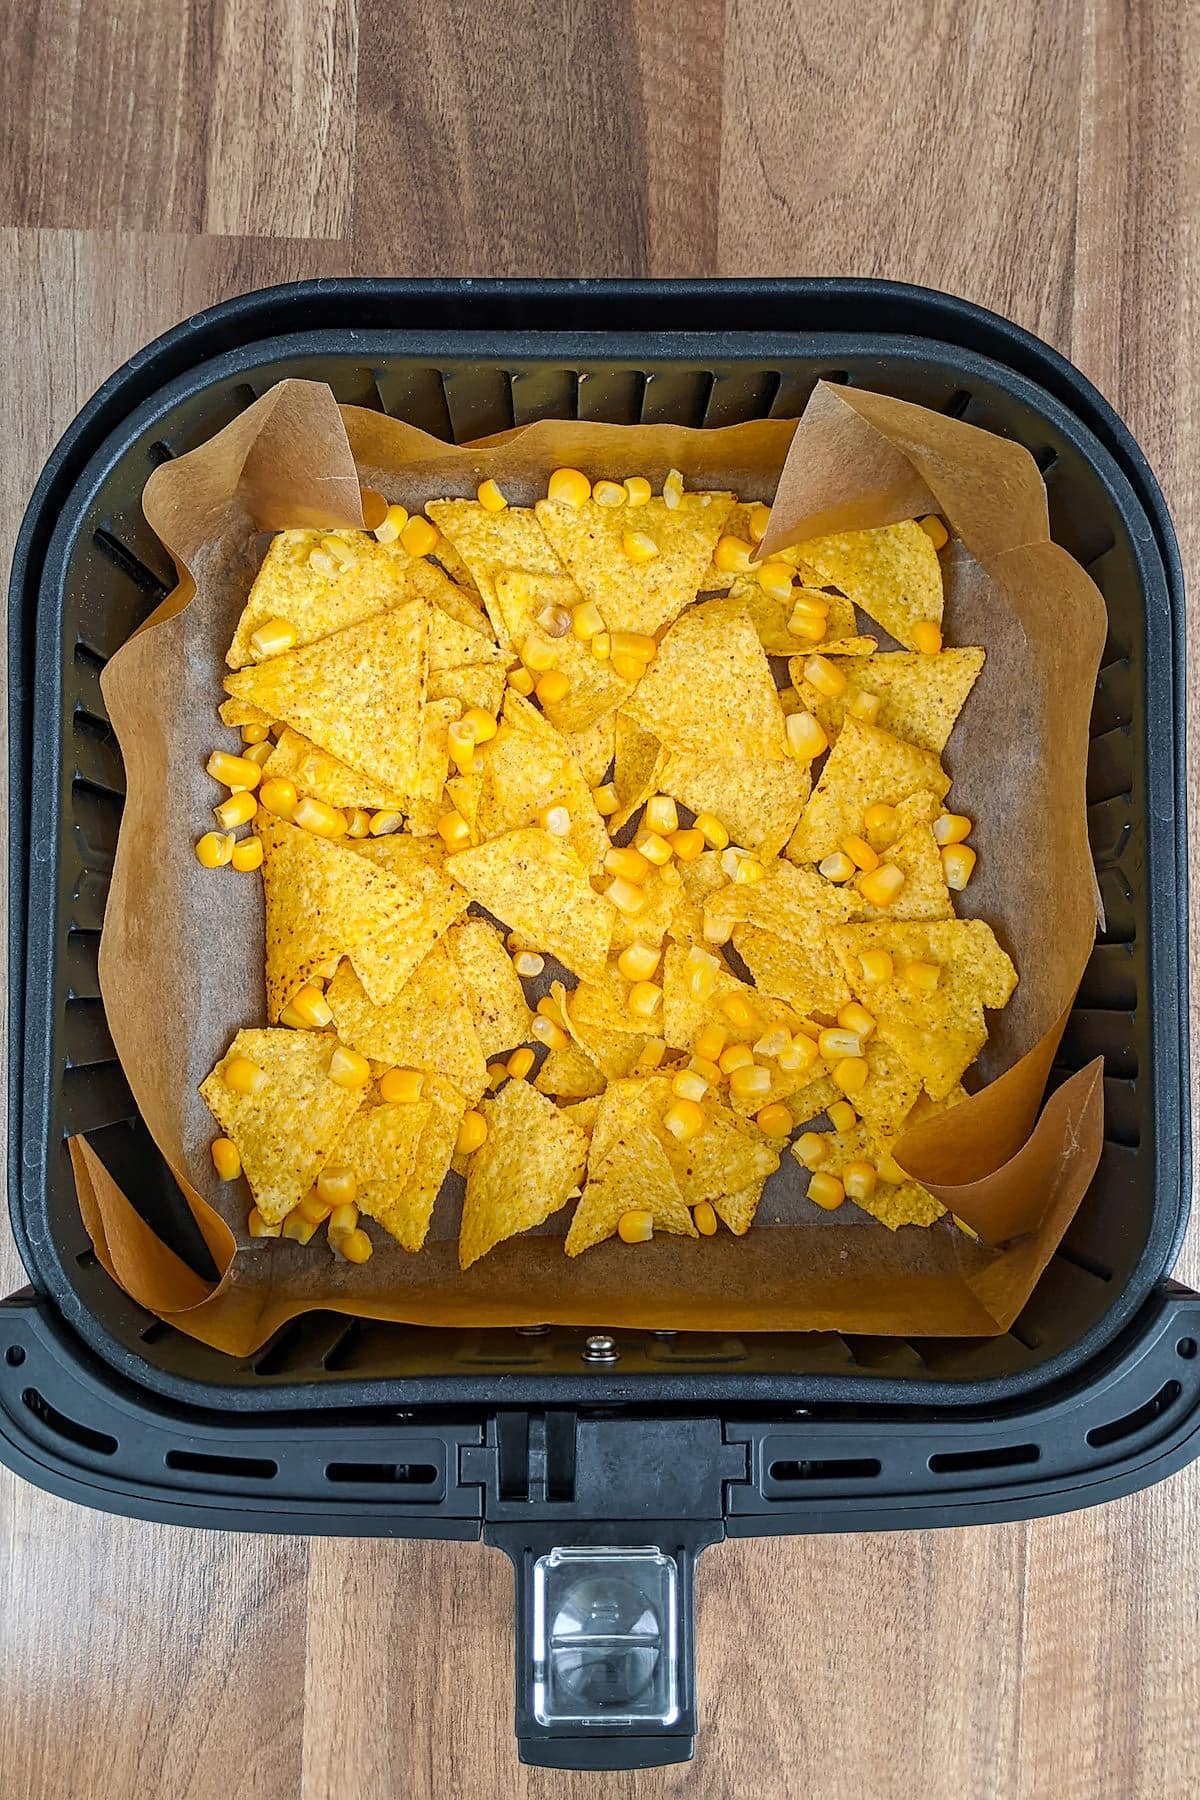 Air fryer basket with tortilla chips and canned corn.